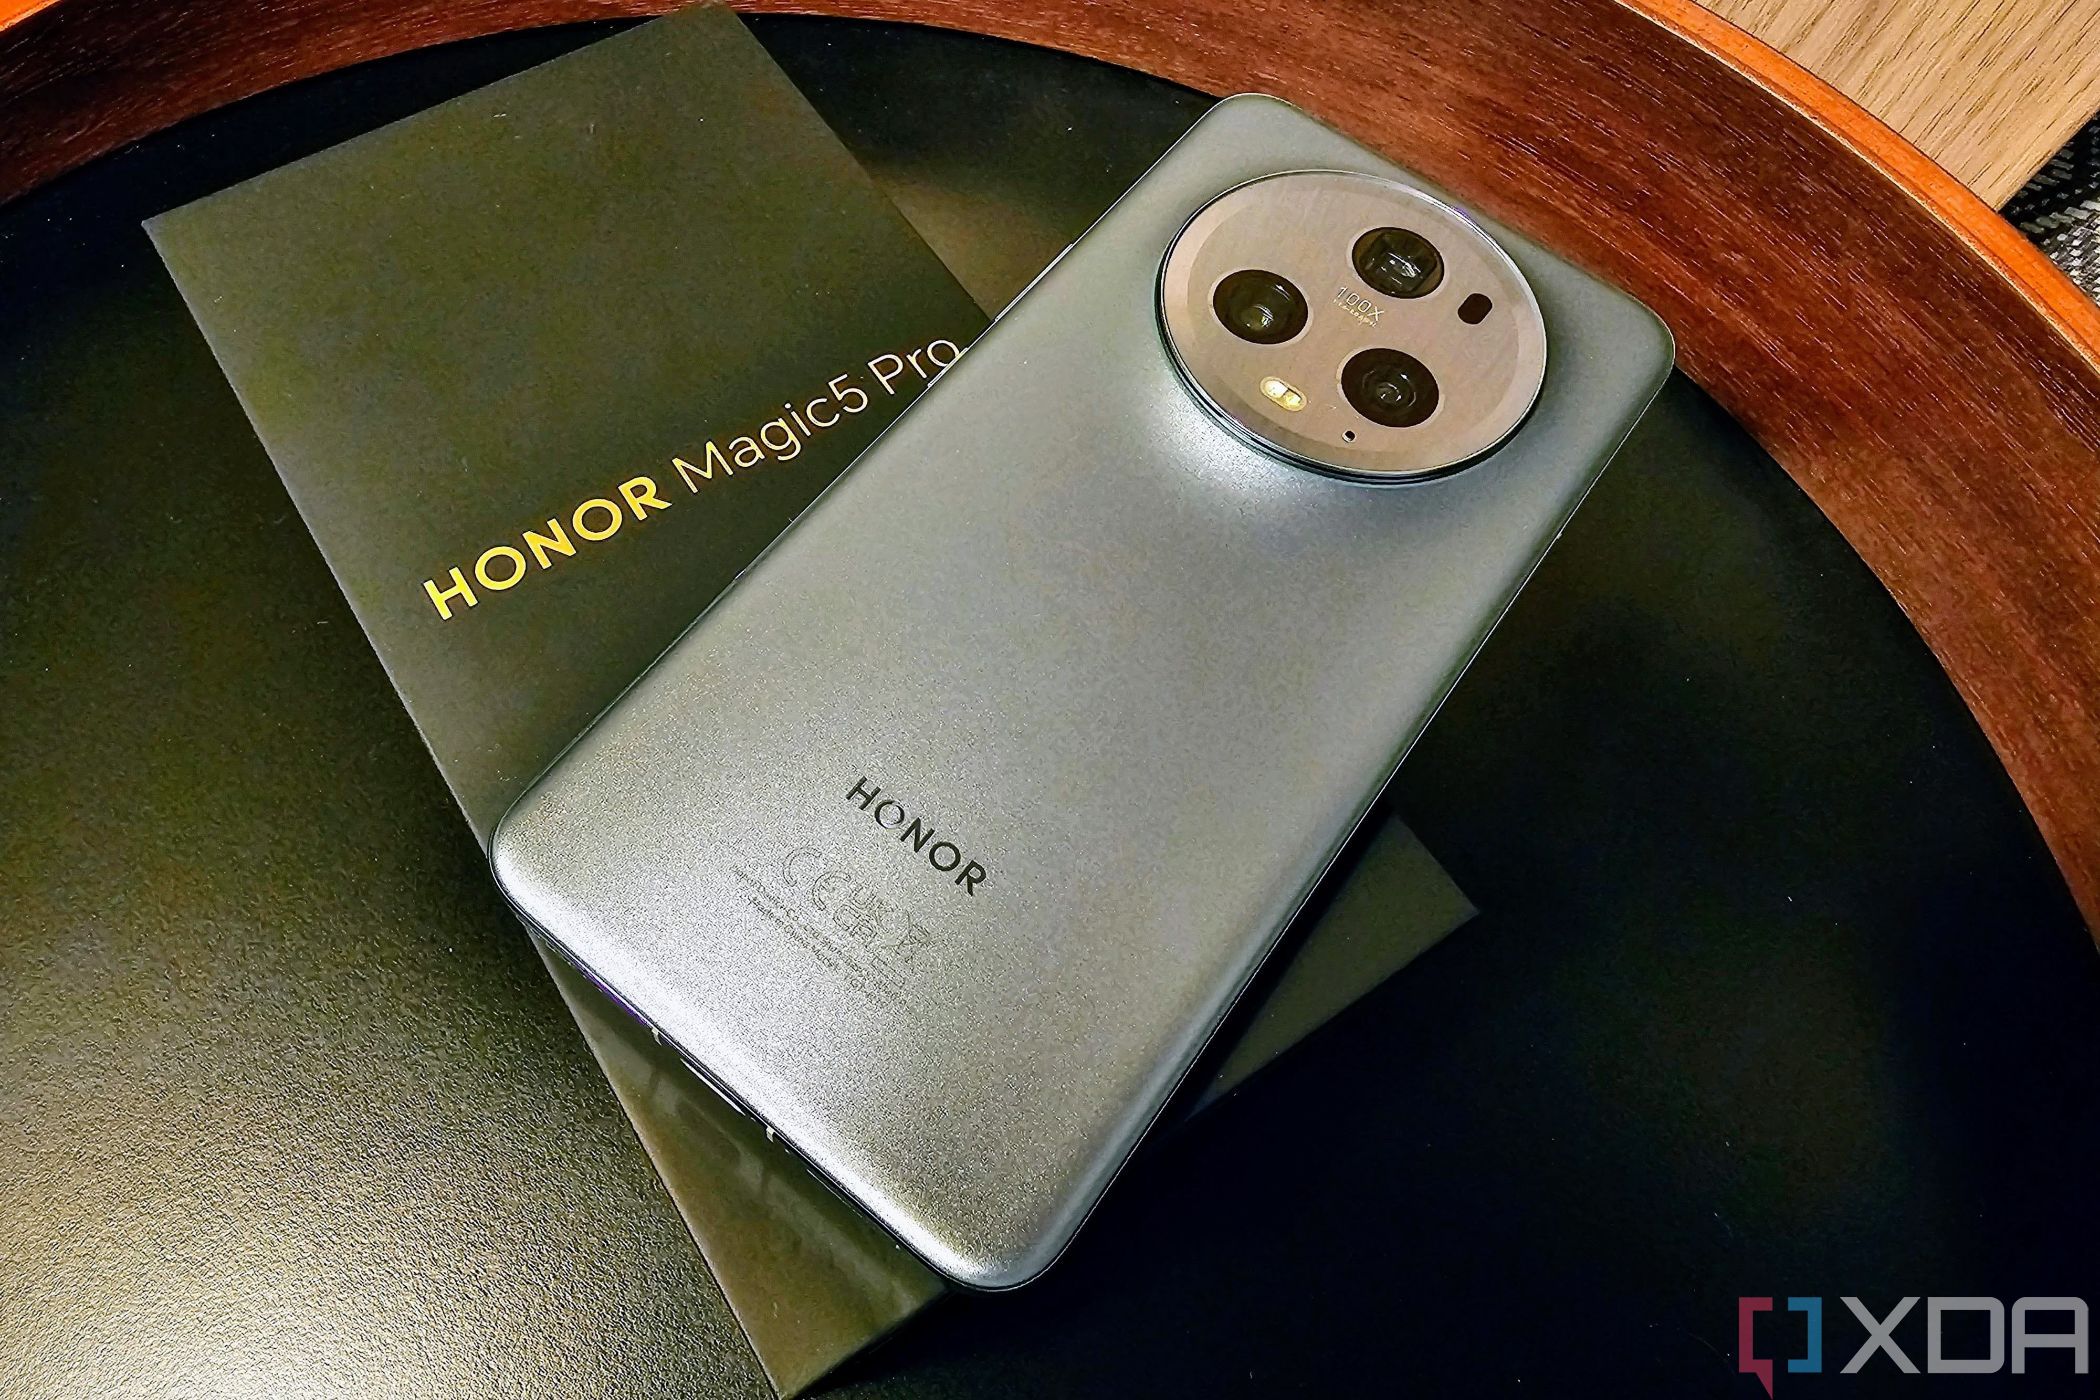 Honor Magic 5 Pro - 8 Essentials You Need to Know 